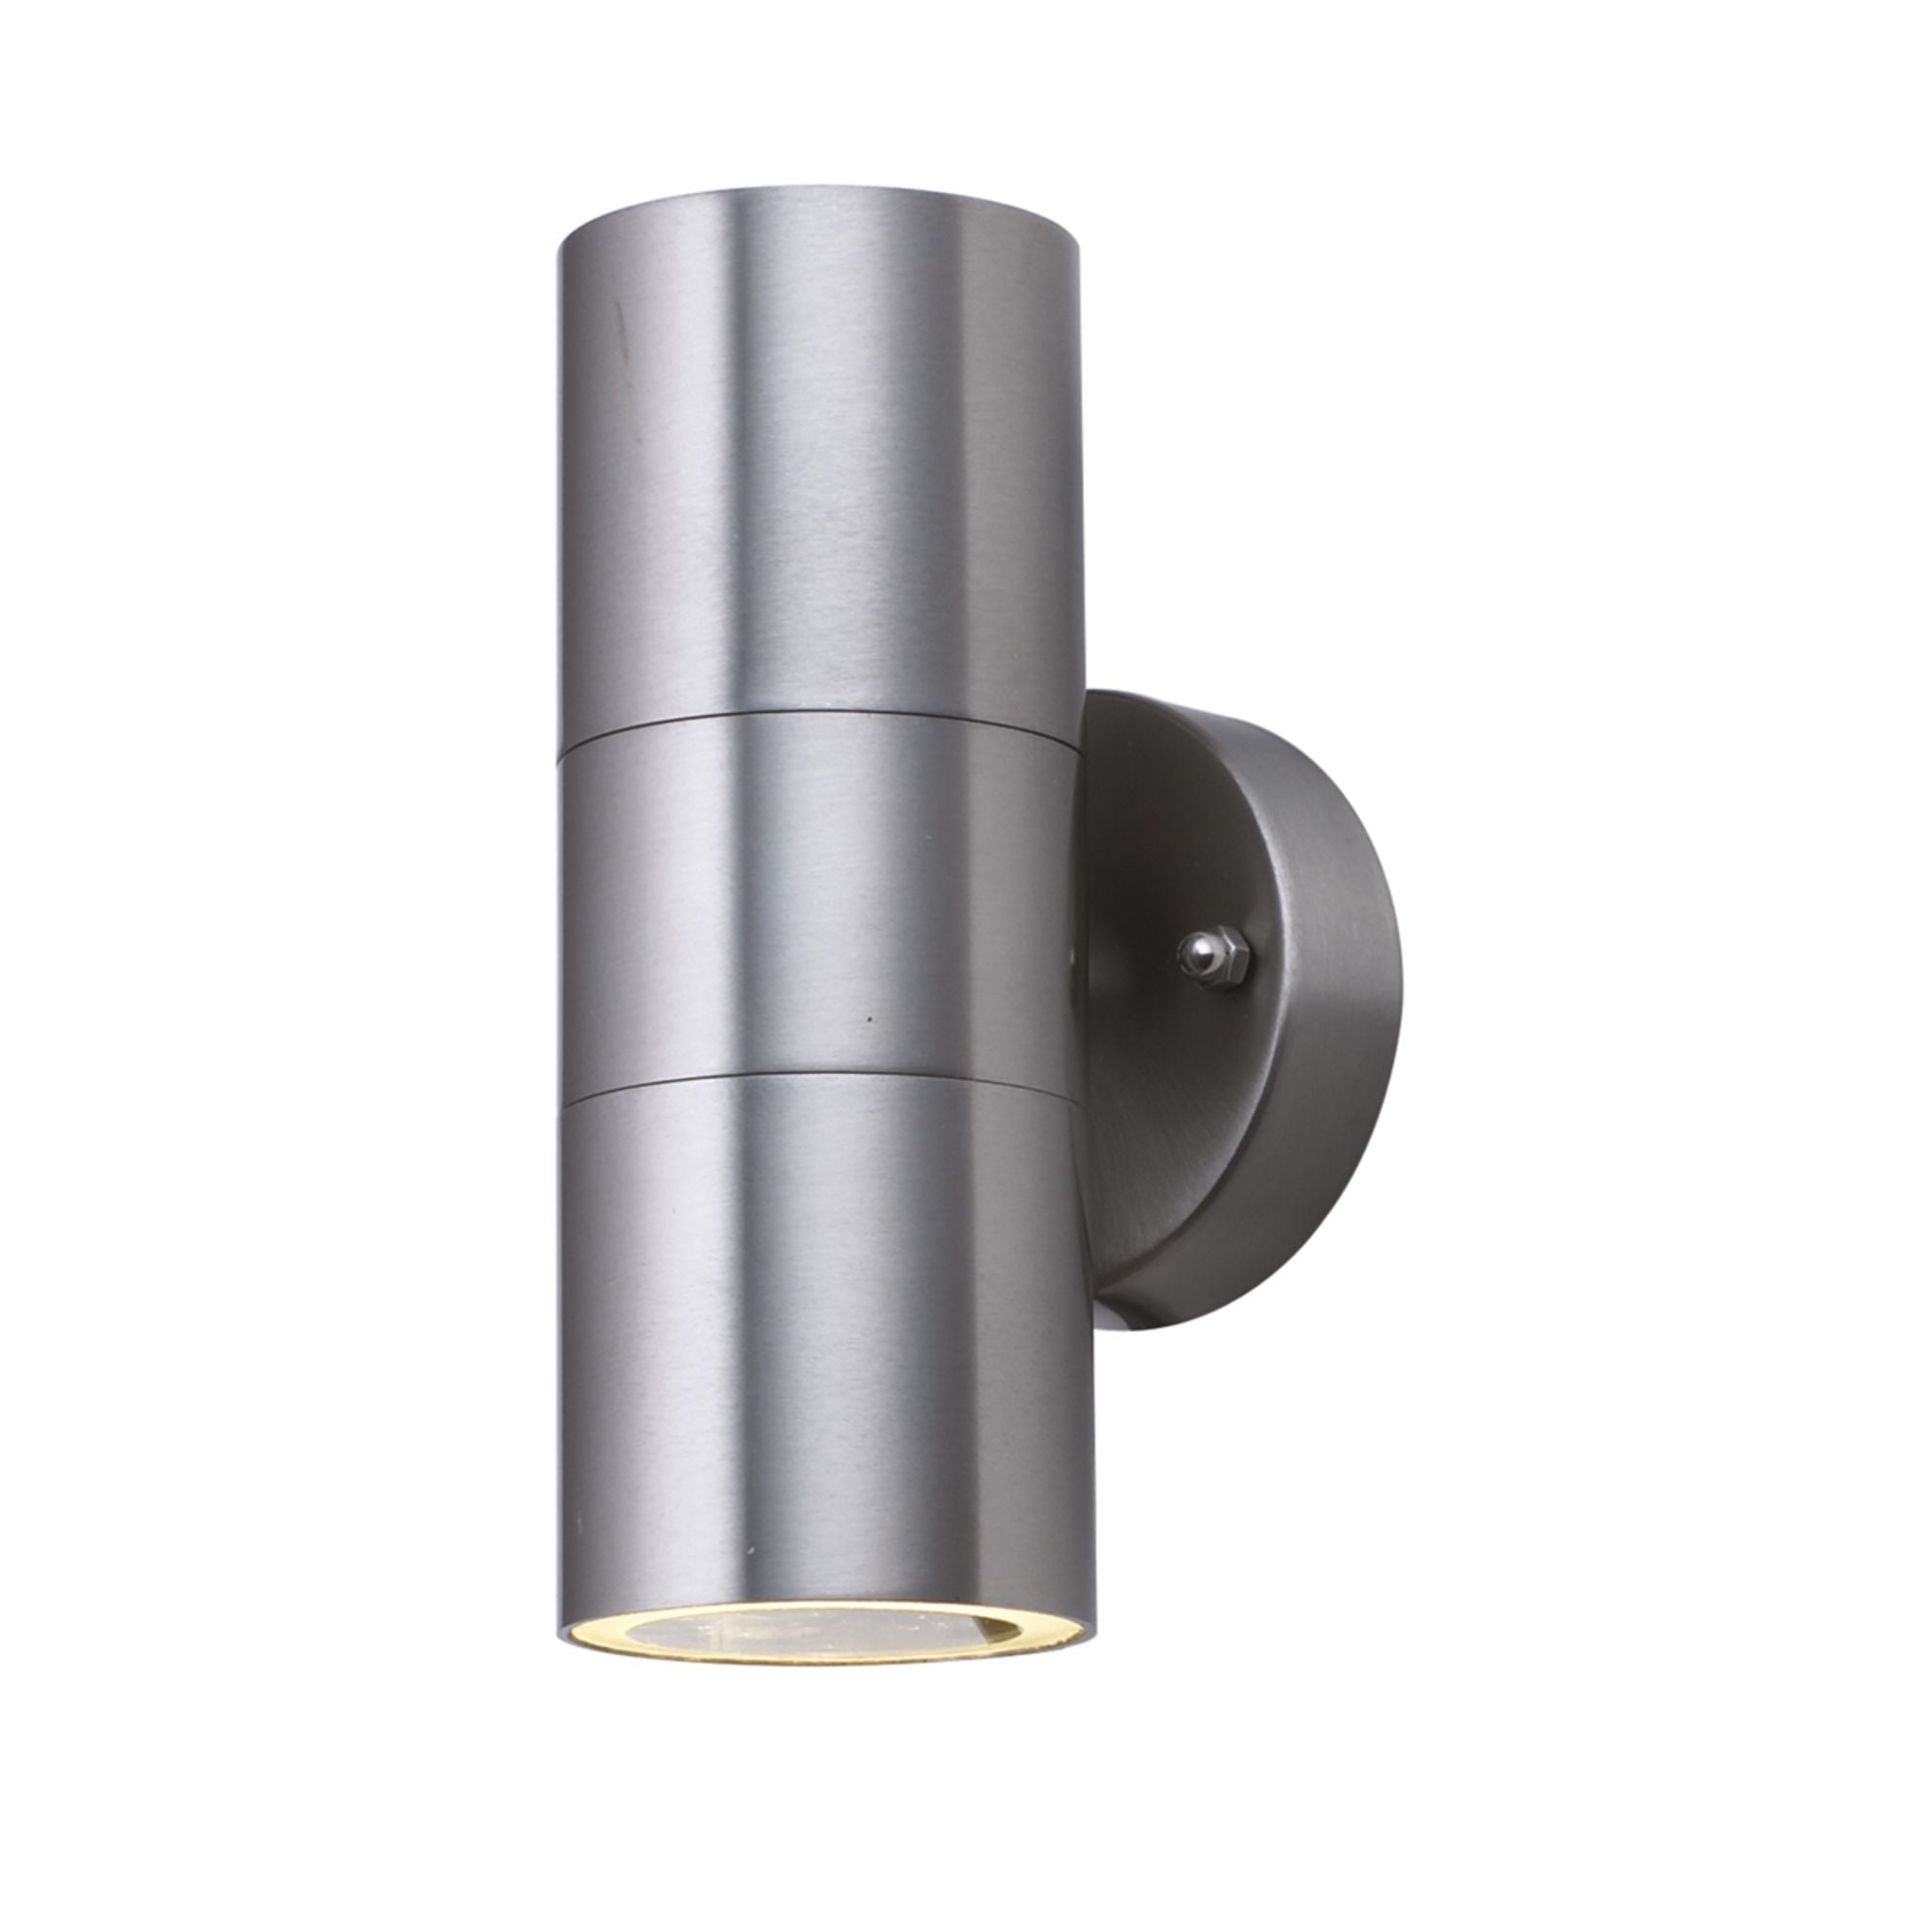 Metro 2 Lights LED Stainless Steel Outdoor Wall Light